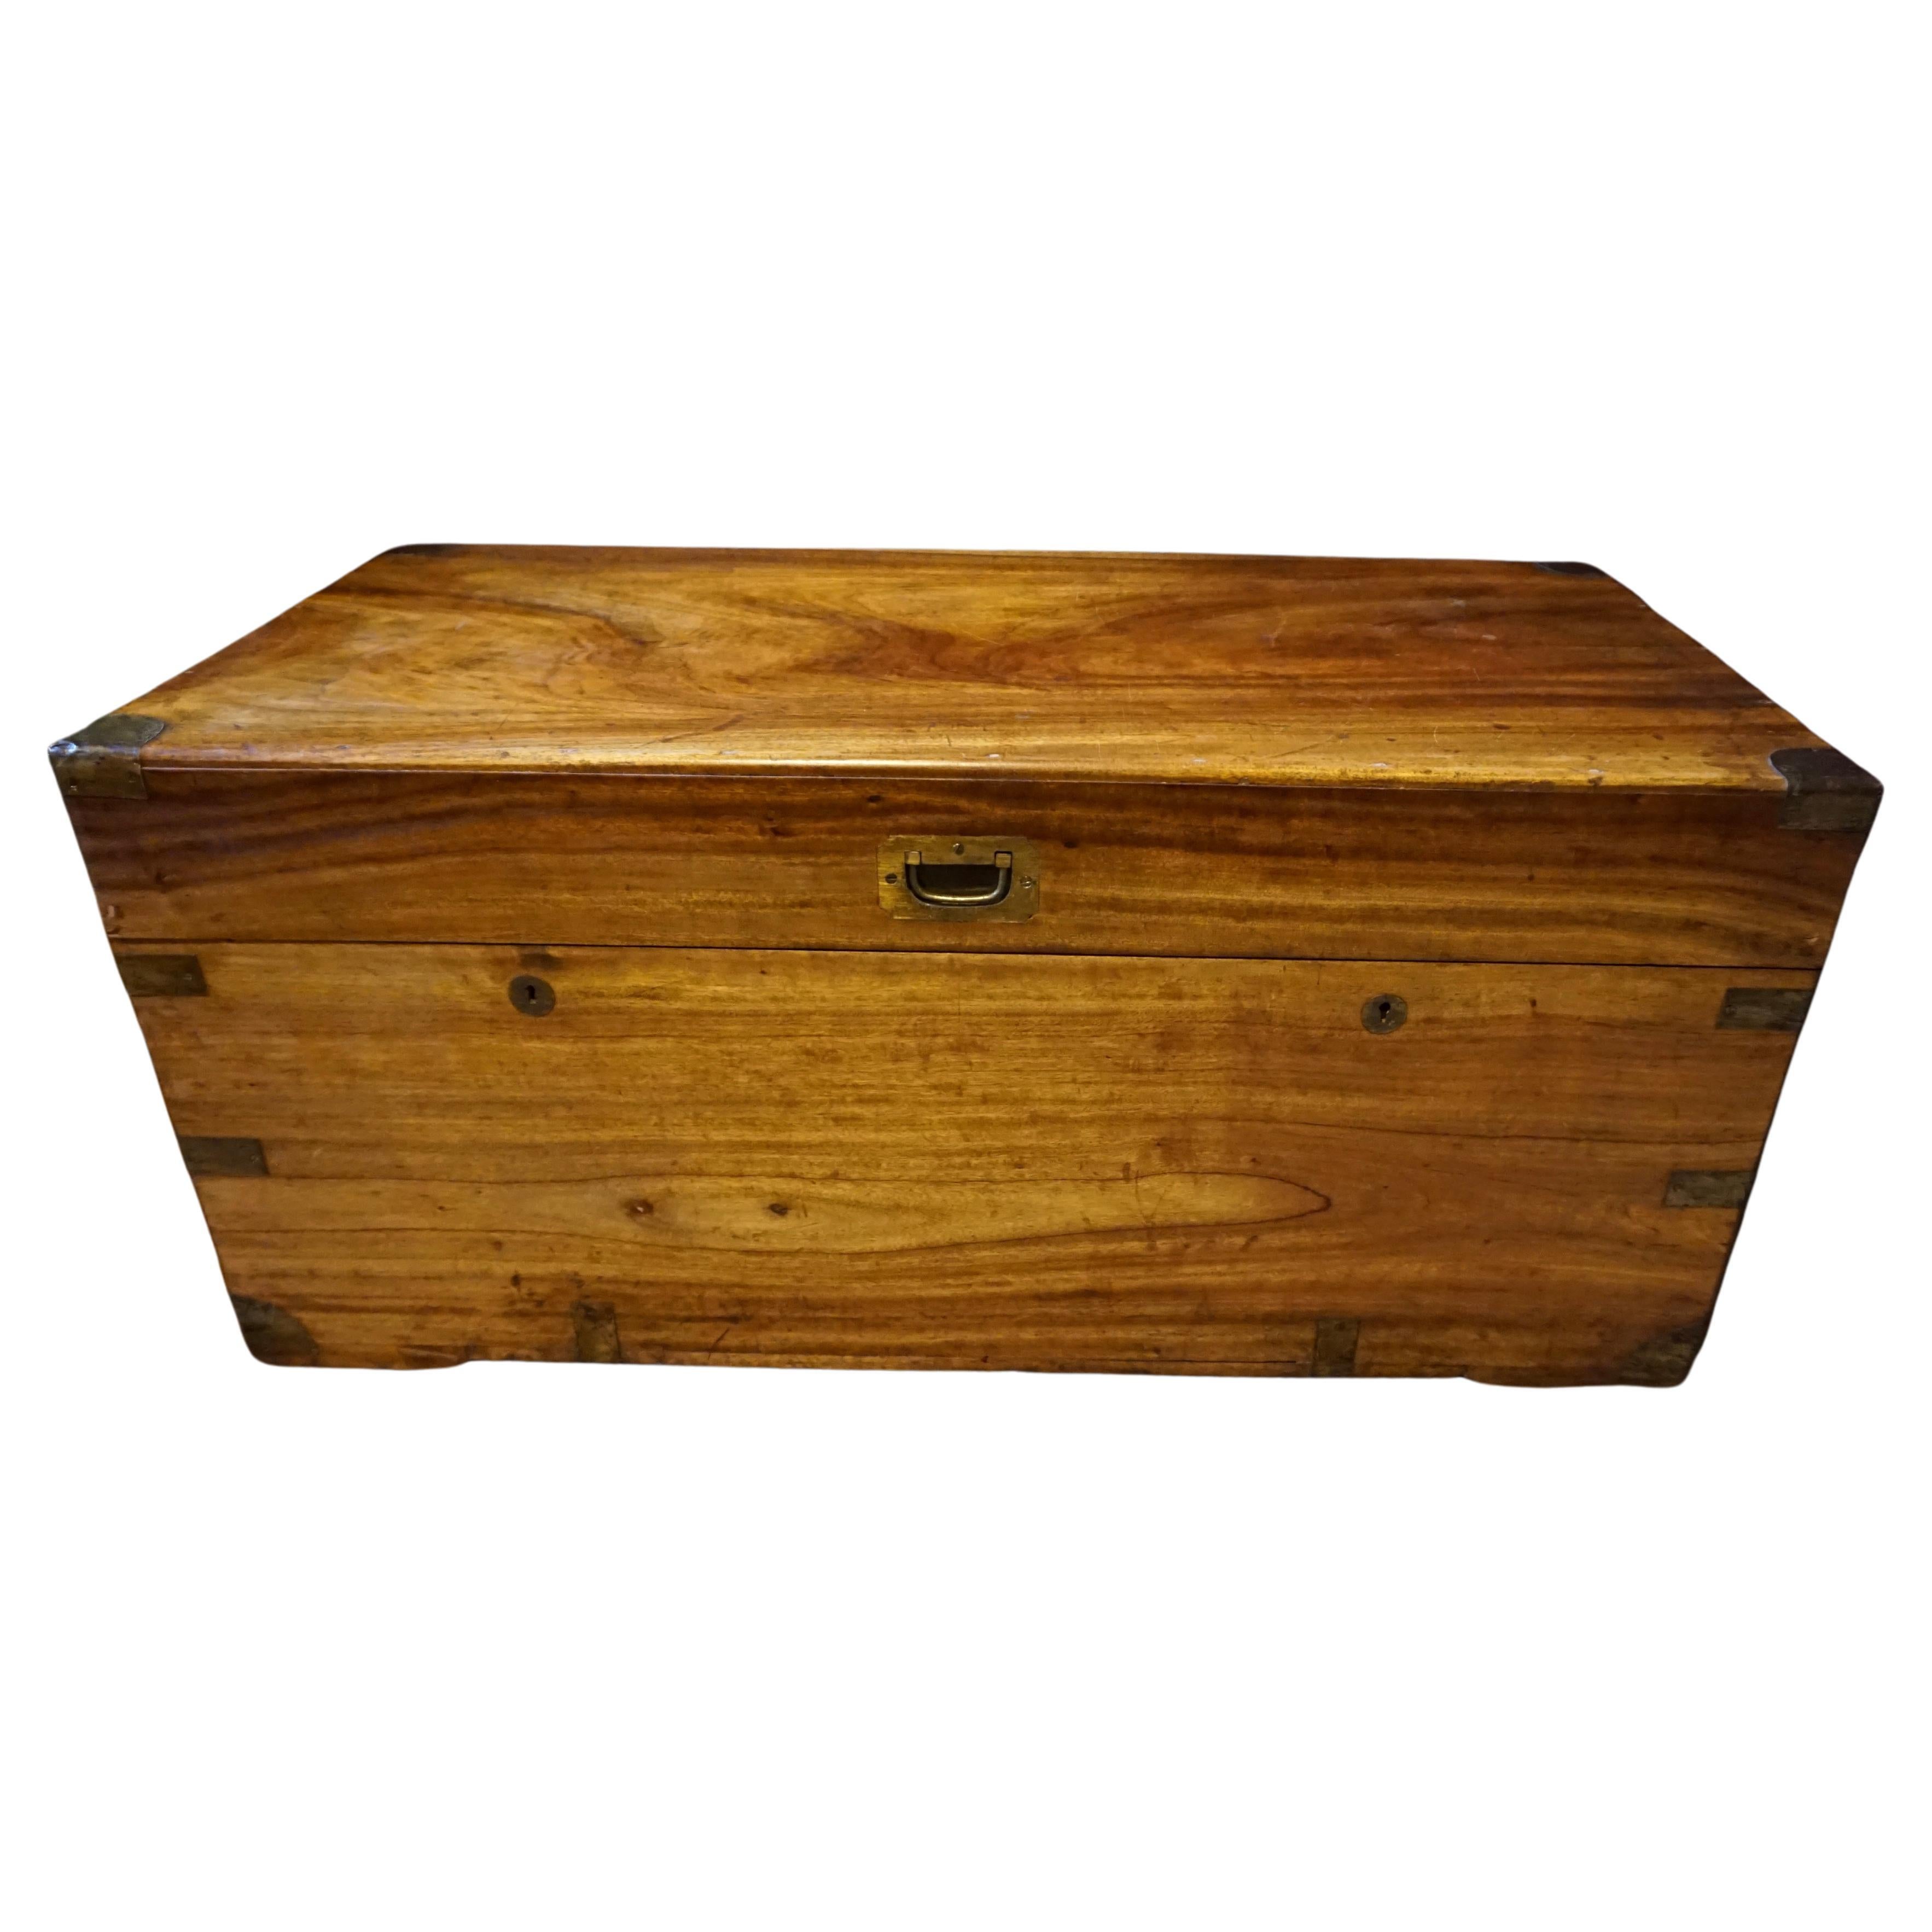 British Colonial Military Campaign Camphor Wood Chest with Brass Hardware